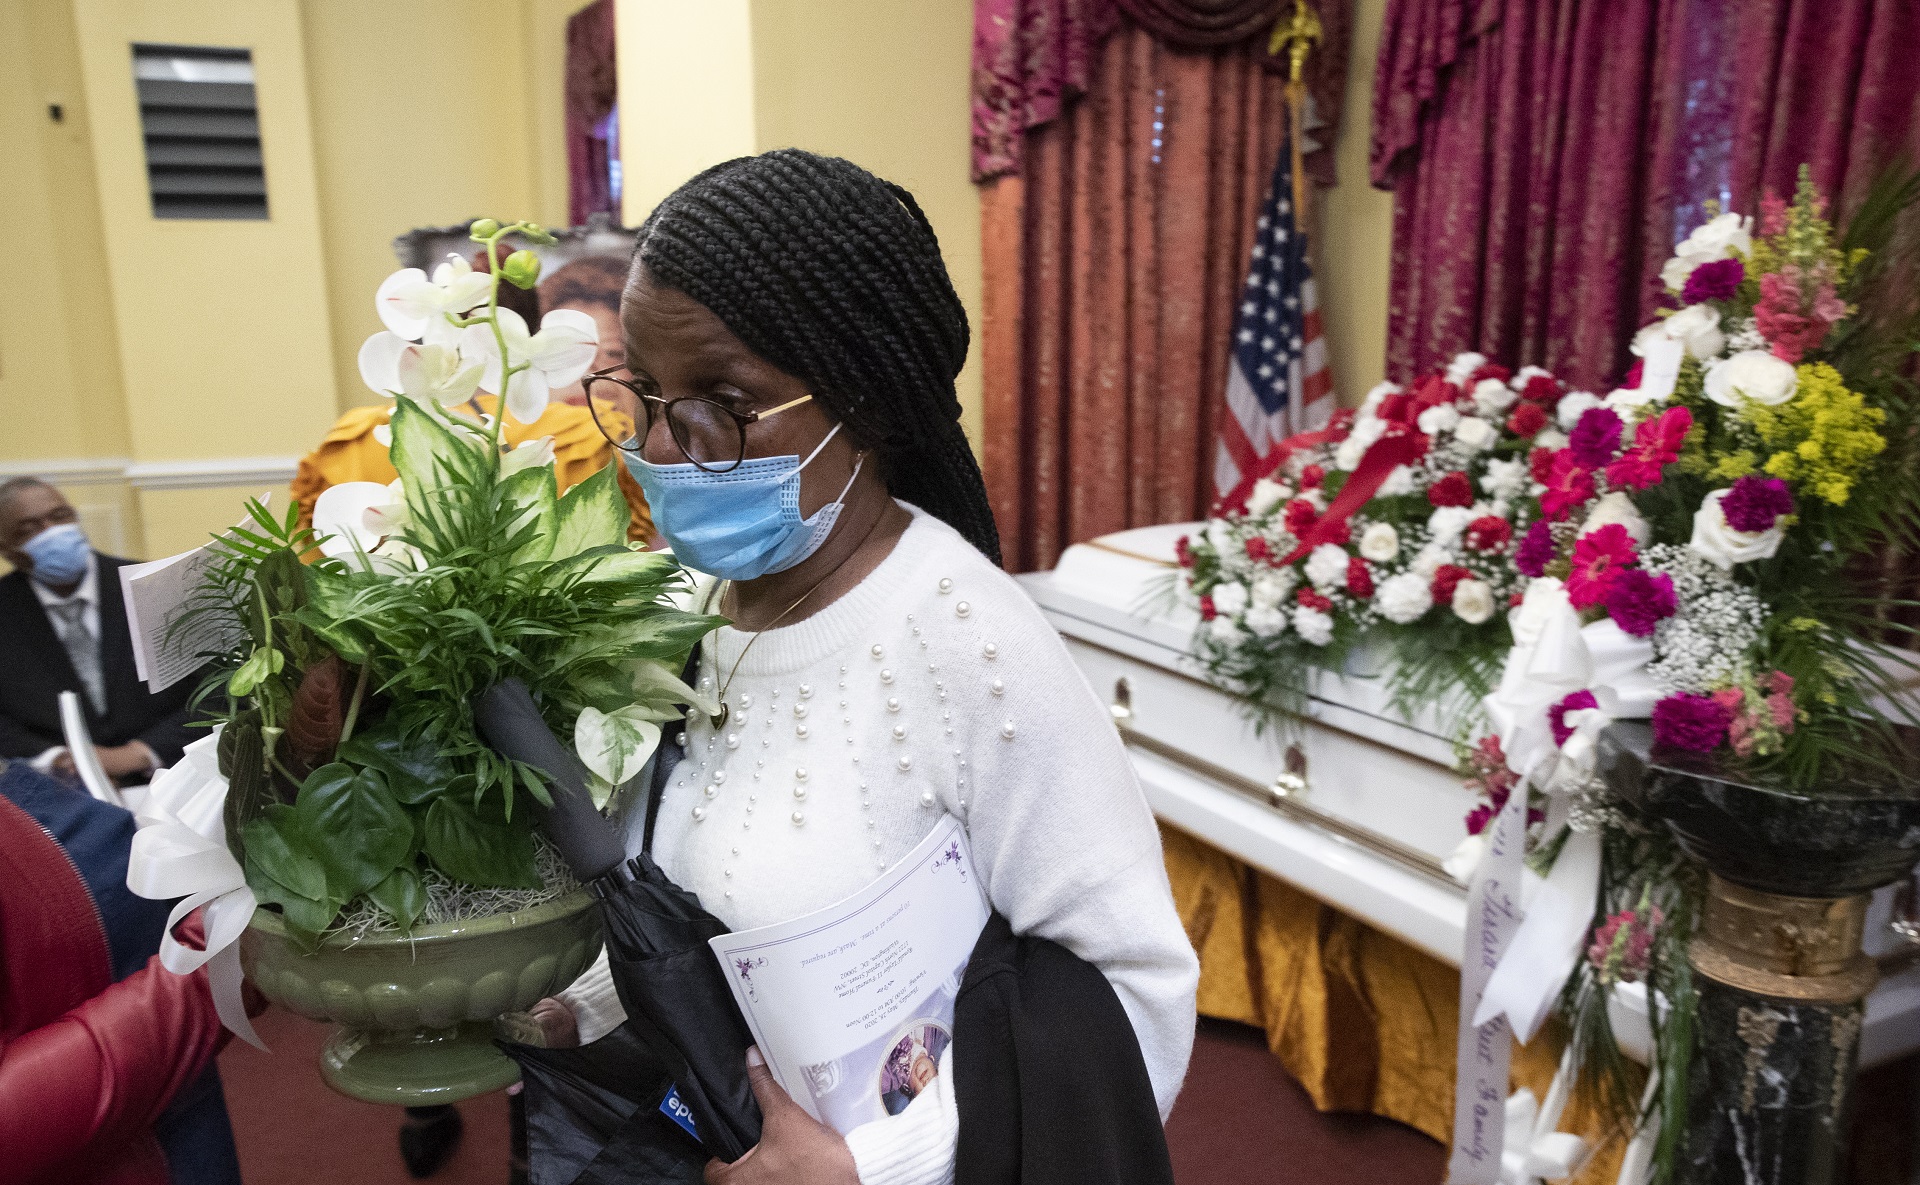 epa08450673 Lavoris Moore carries flowers beside the casket holding the remains of her sister, Evelyn Moore Smith, who died with coronavirus COVID-19 disease, following a funeral service at Ronald Taylor II Funeral Home in Washington, DC, USA, 28 May 2020. Evelyn Moore Smith was married for forty-five years to Calvin Smith Sr. and passed away 20 May, 2020, at the age of sixty-eight. The official COVID-19 death toll in the US has passed one hundred thousand, which is more than any other nation.  EPA/MICHAEL REYNOLDS  ATTENTION: This Image is part of a PHOTO SET